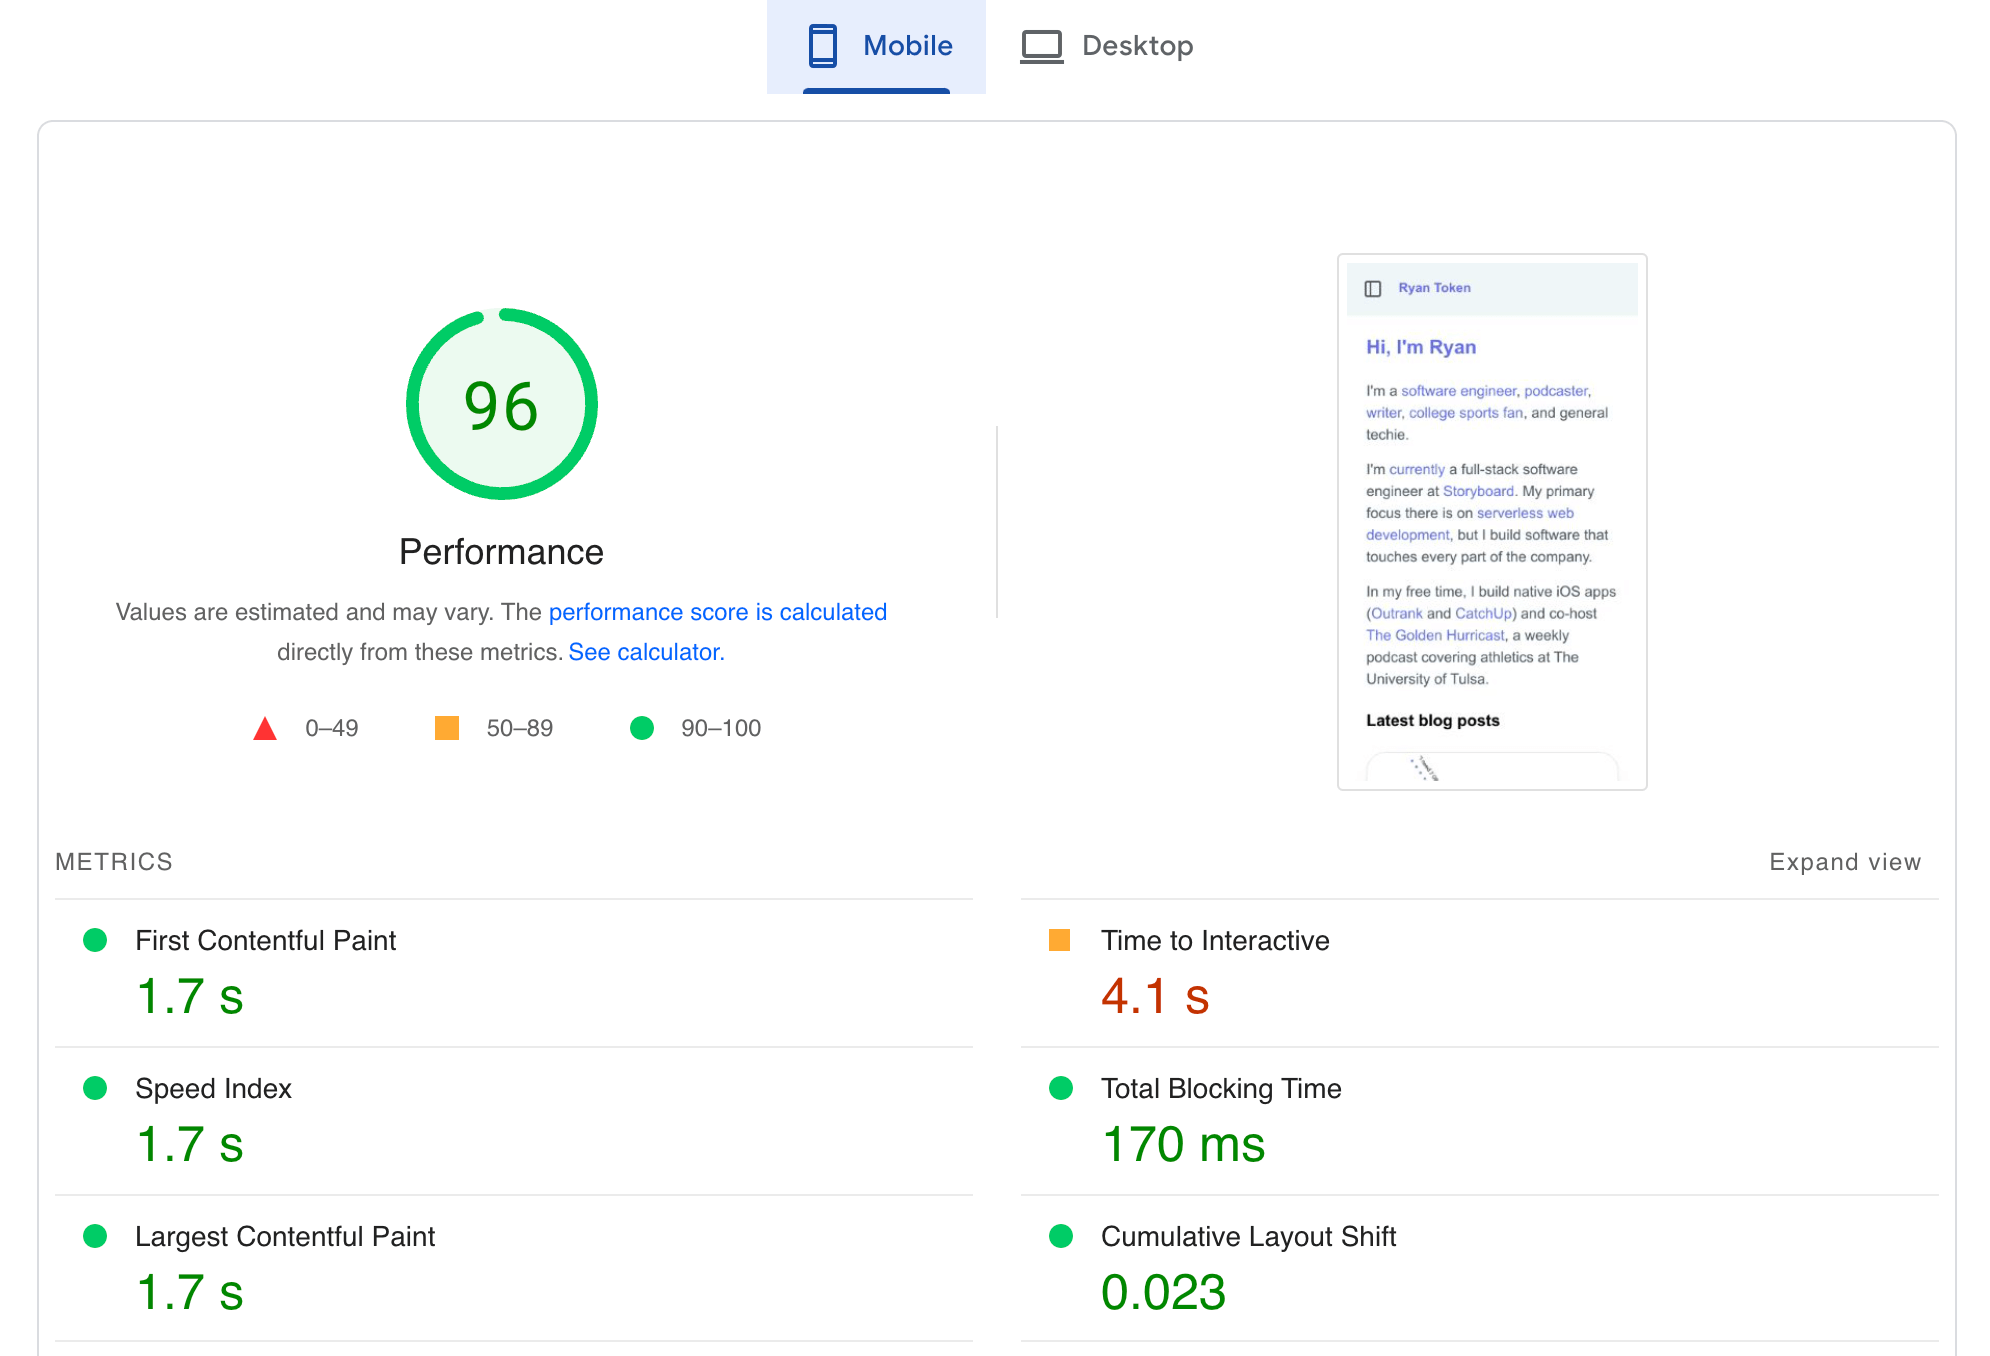 PageSpeed Insights scores for the SvelteKit site on mobile